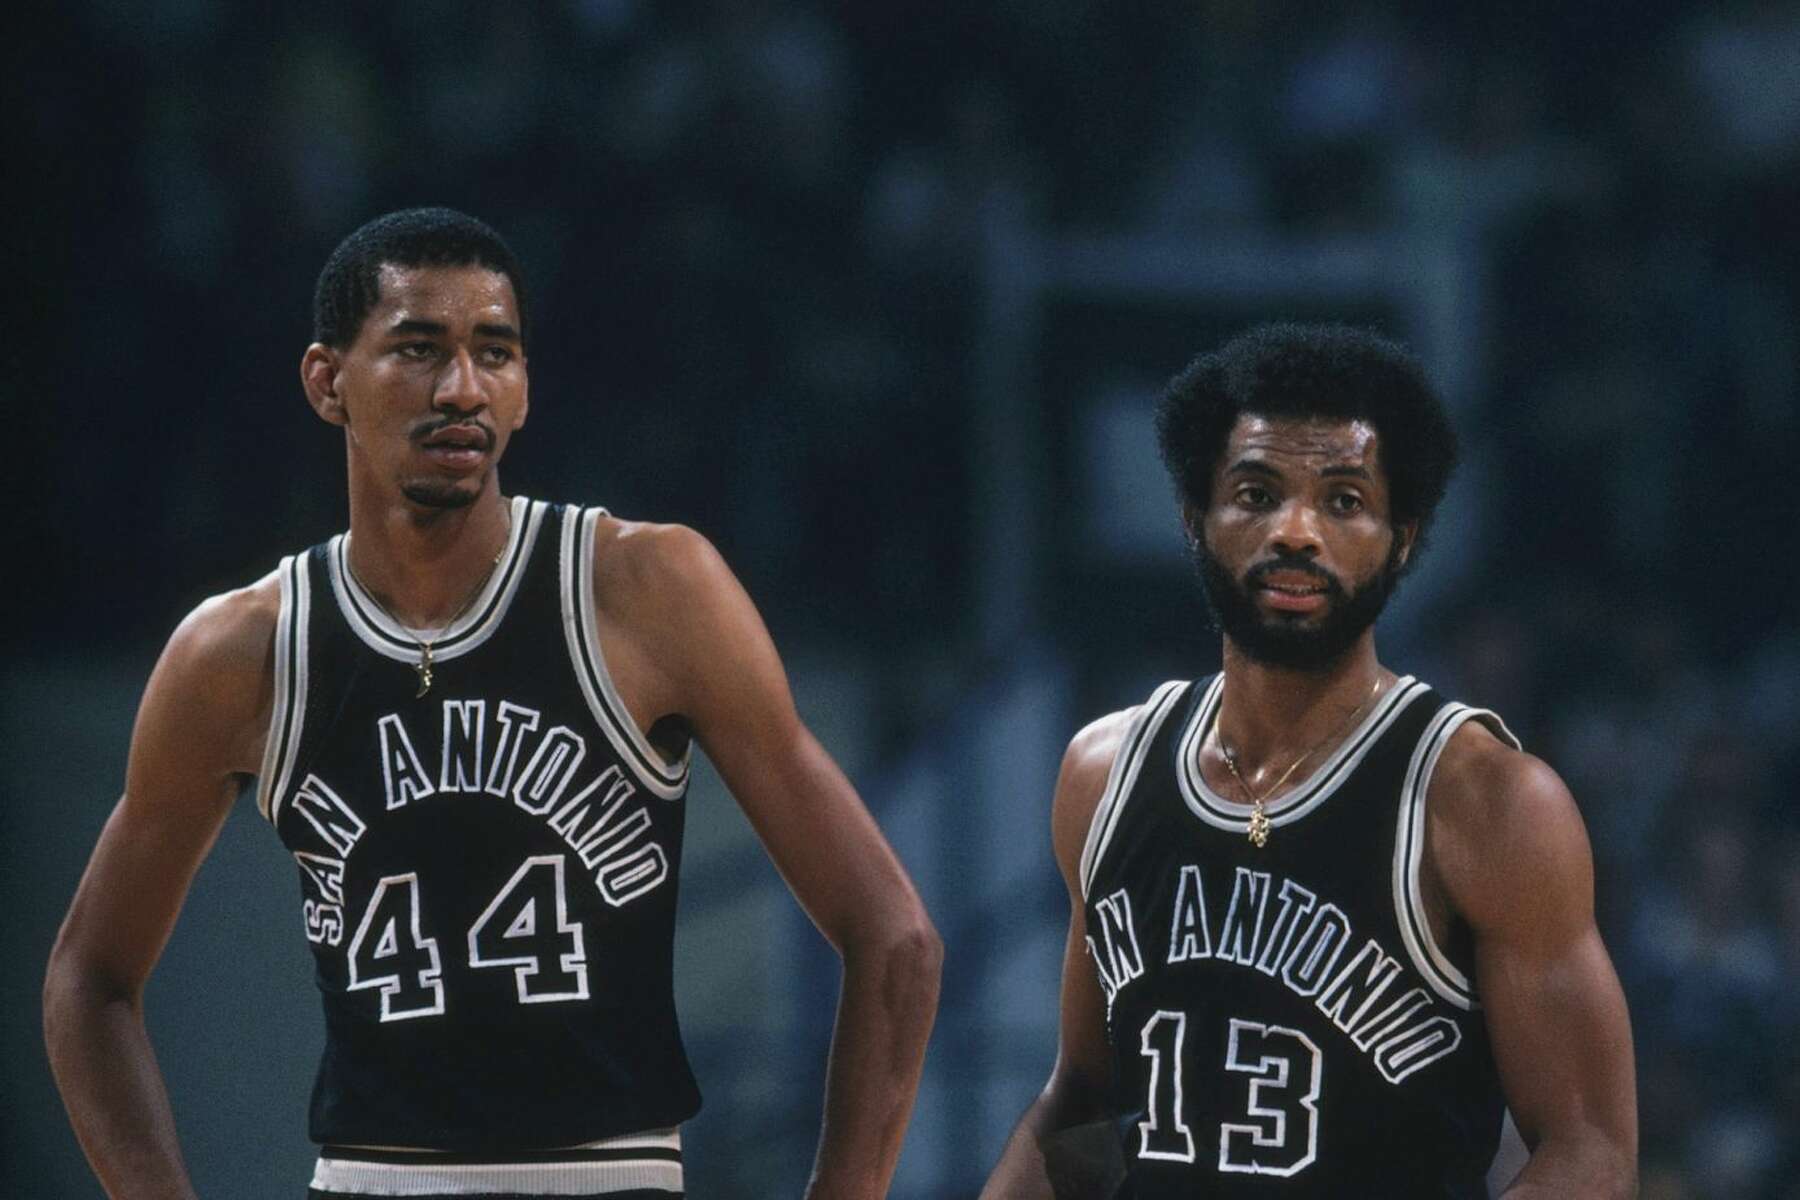 San Antonio Spurs' George Gervin stands next to James Silas on the